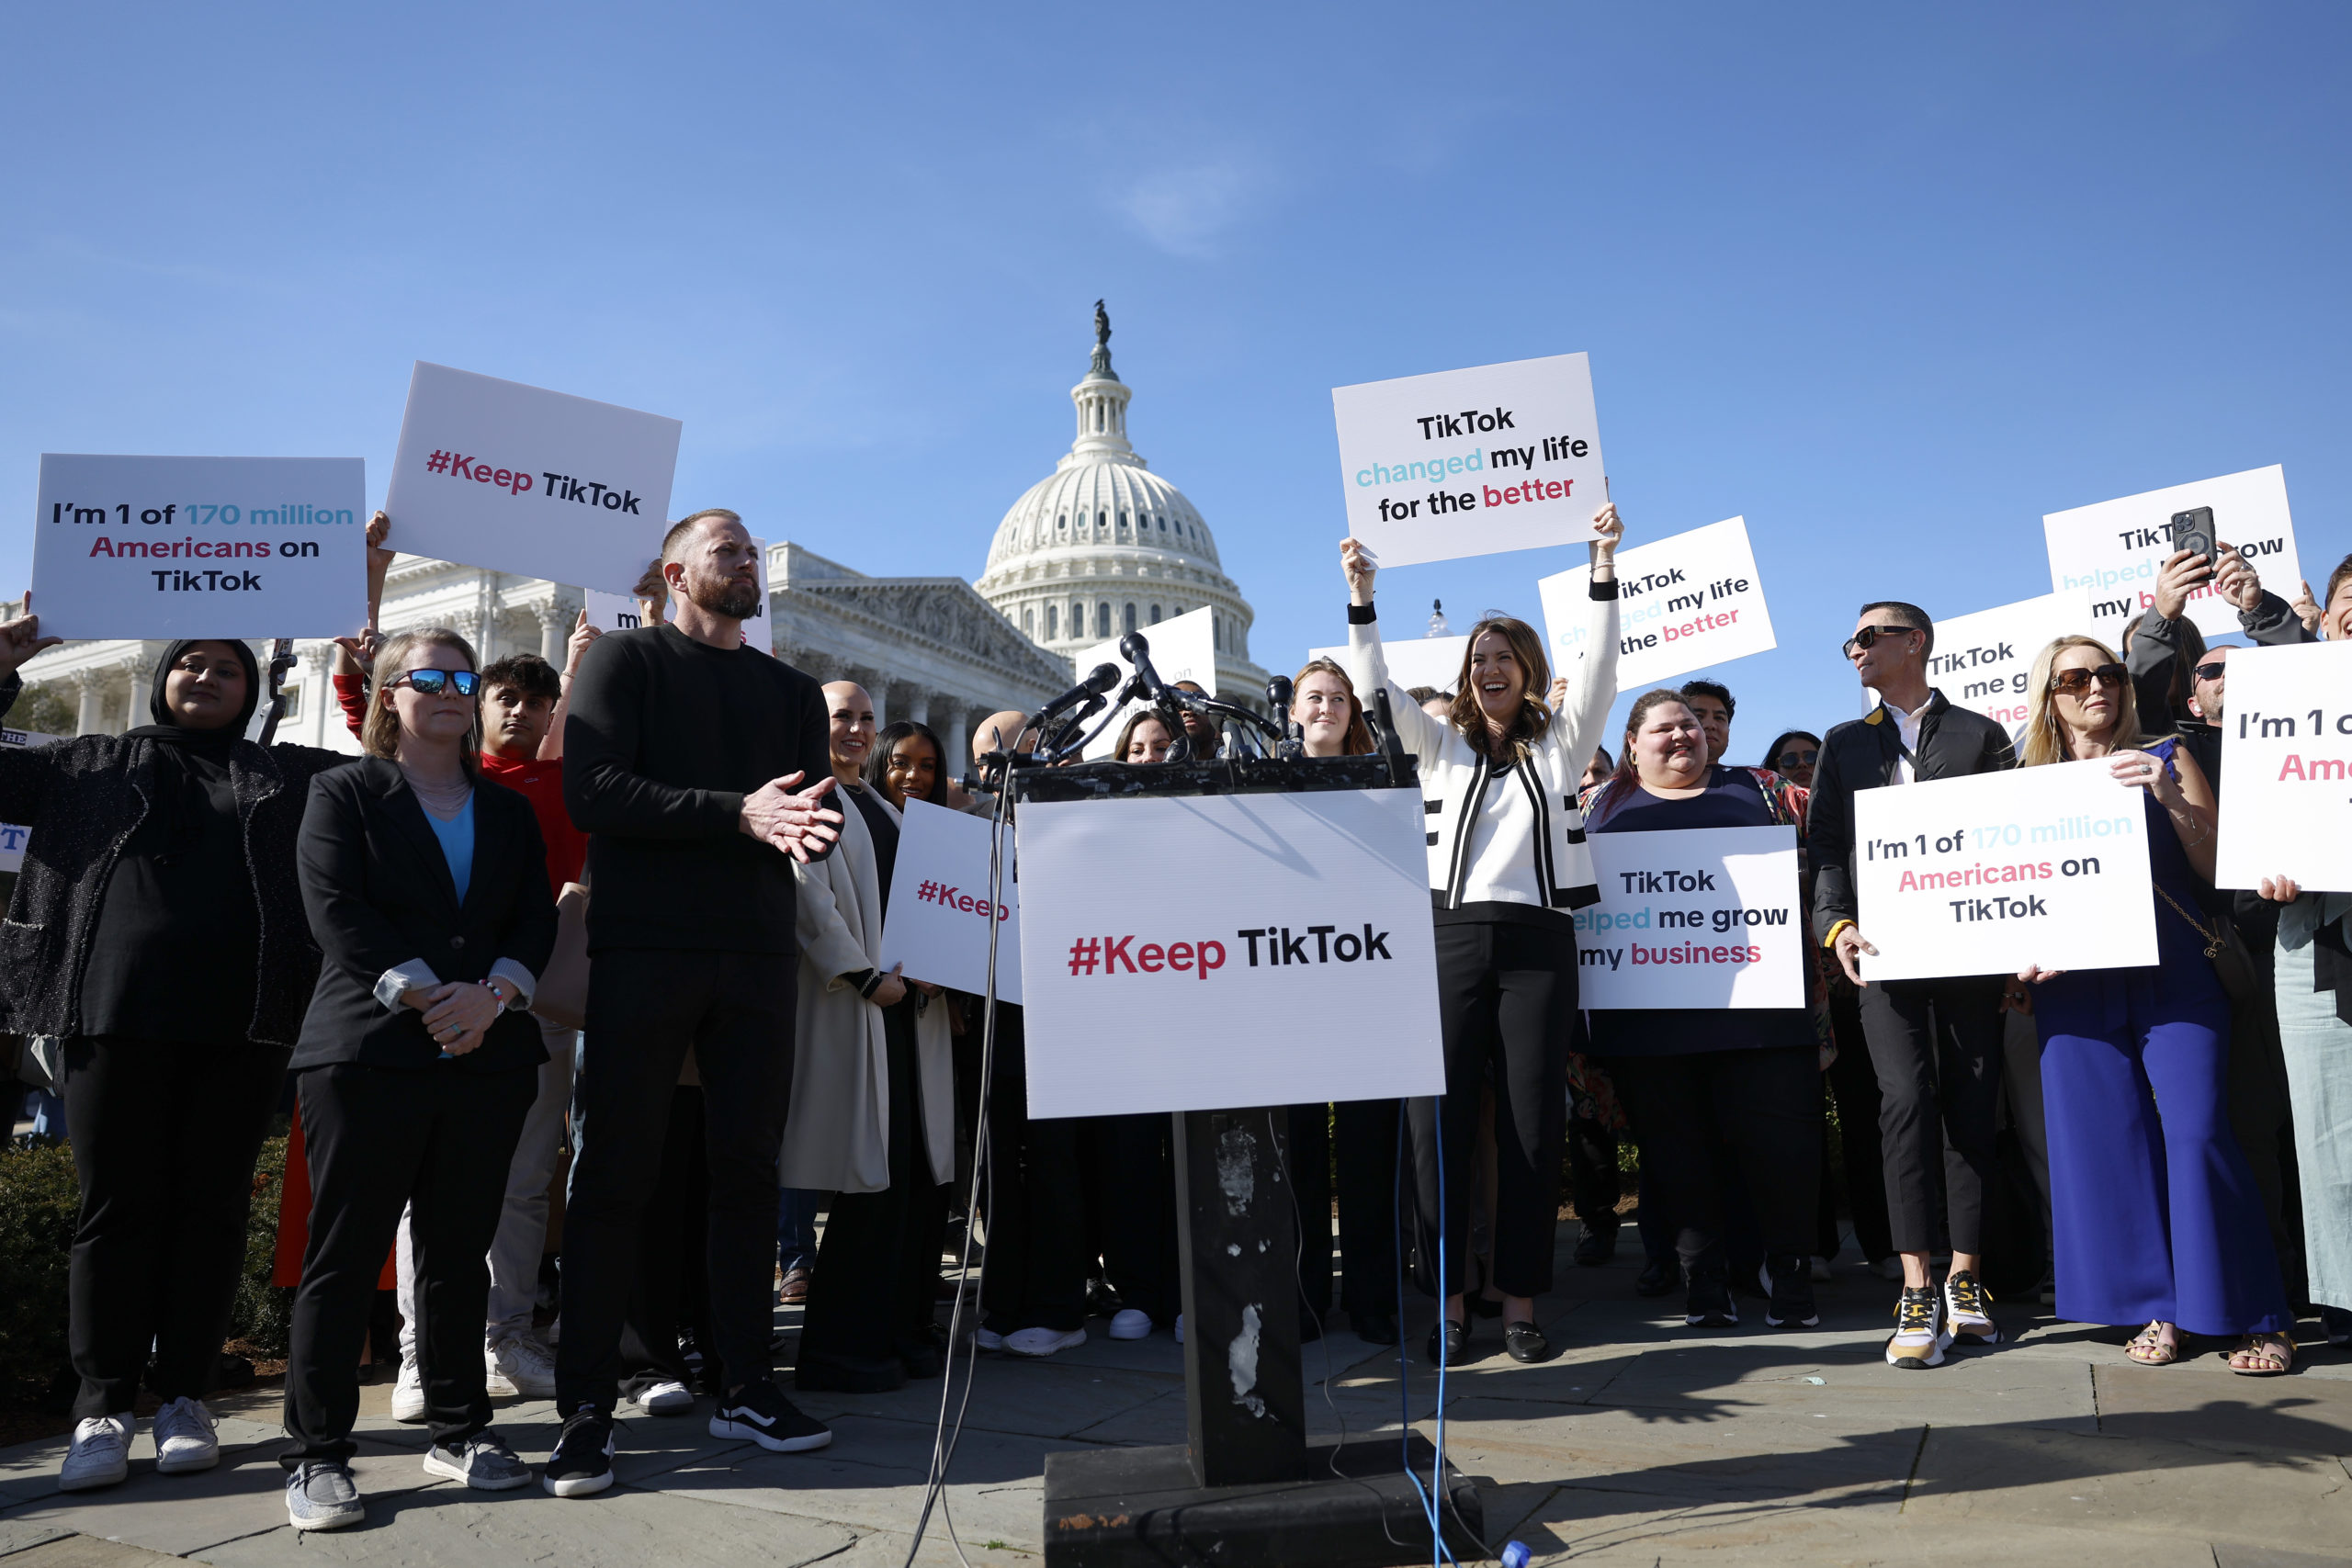 WASHINGTON, DC - MARCH 12: Participants hold up signs in support of TikTok at a news conference outside the U.S. Capitol Building on March 12, 2024 in Washington, DC. House Democrats and TikTok creators and business owners held the news conference to express their concern over House Republicans legislation that would force the owners of the popular Chinese social media app to sell the platform or face a ban in the United States. (Photo by Anna Moneymaker/Getty Images)